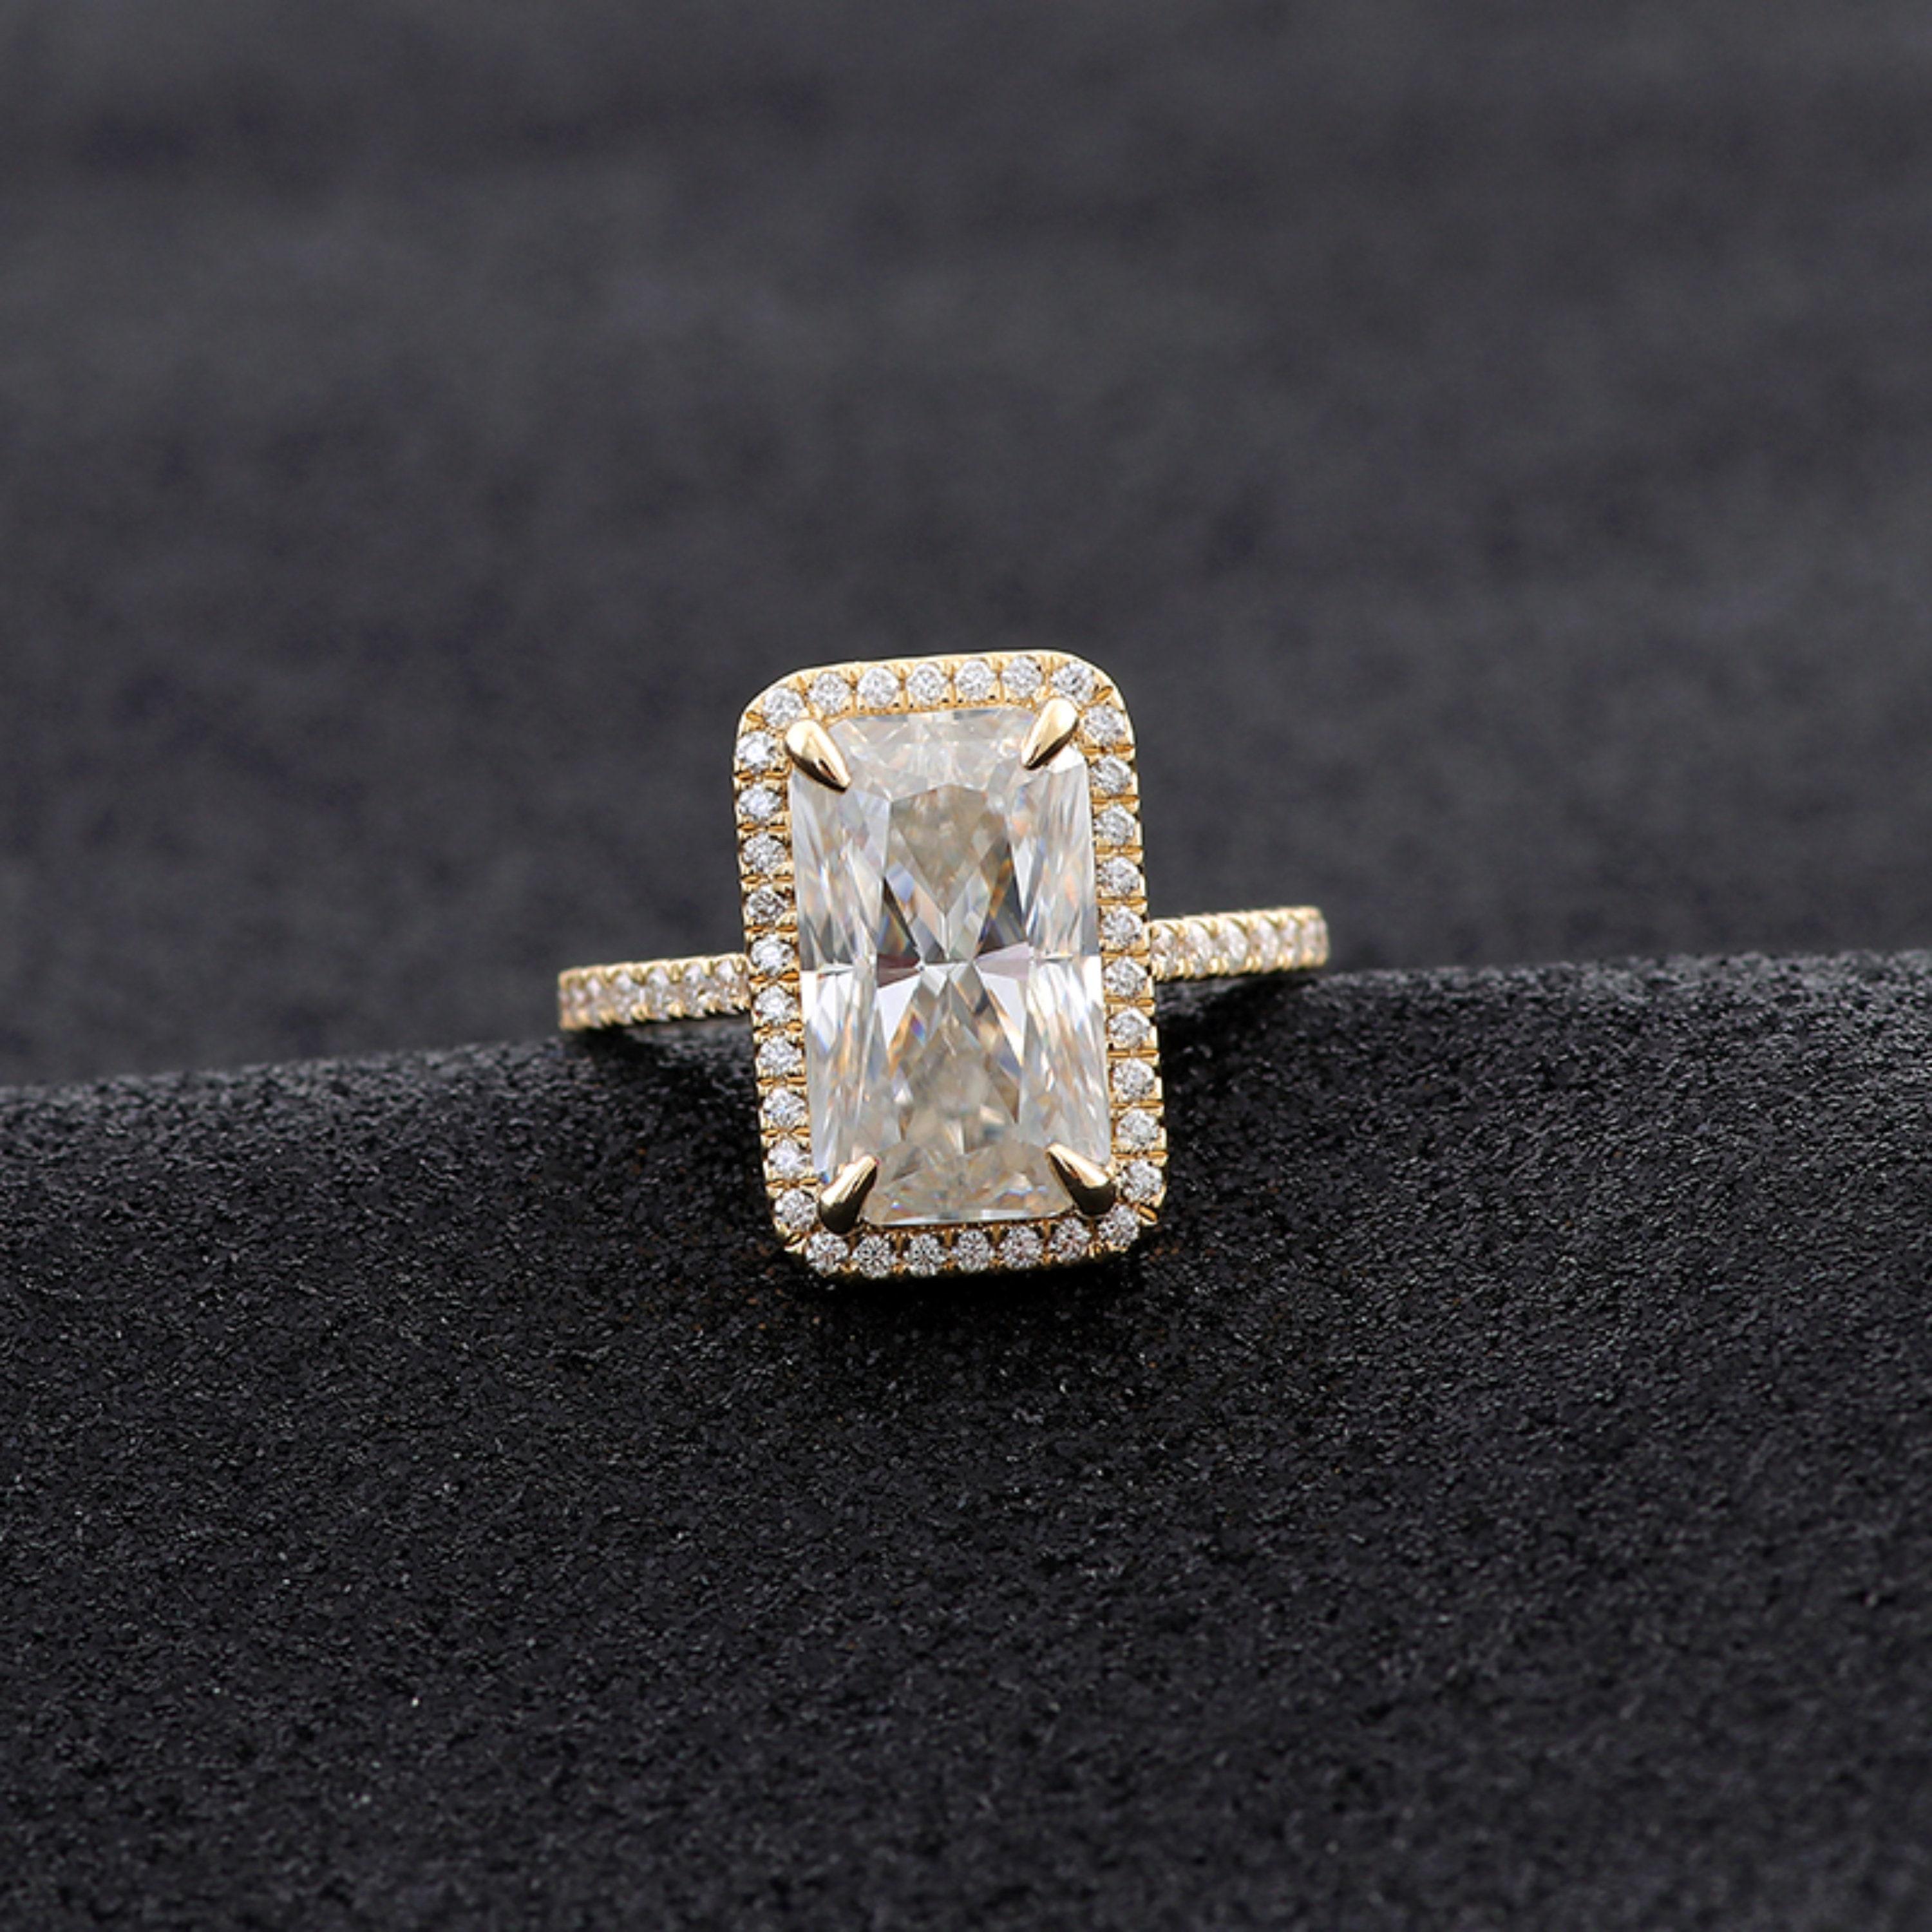 For Sale:  Certified 4 Carat Halo Radiant Cut Natural Diamond Engagement Ring in 18K Gold 5